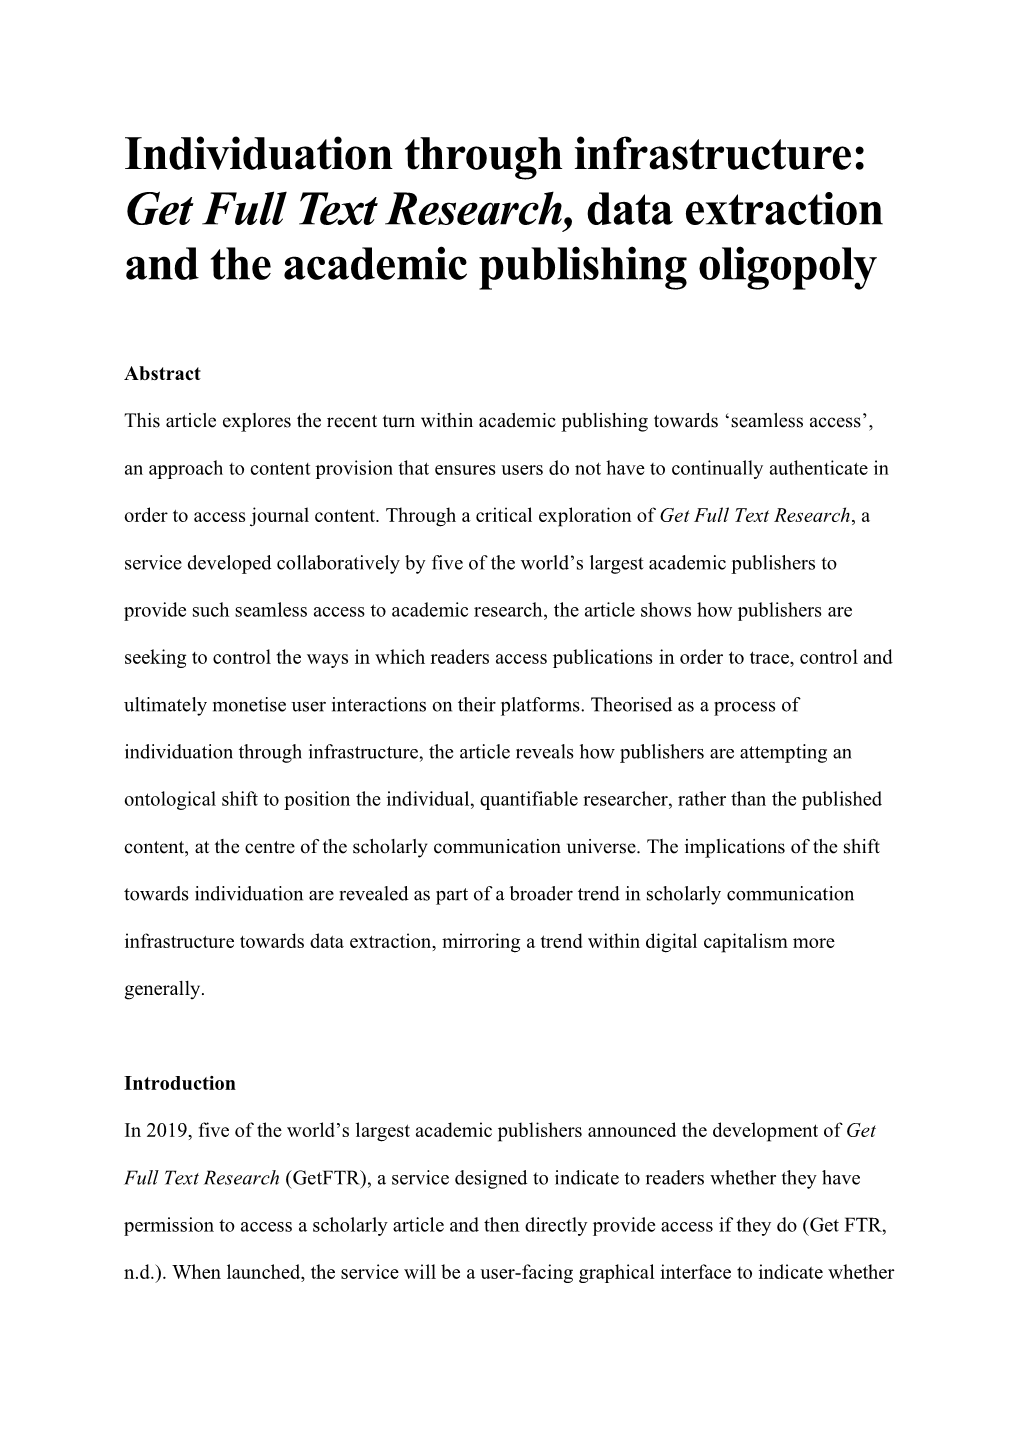 Individuation Through Infrastructure: Get Full Text Research, Data Extraction and the Academic Publishing Oligopoly